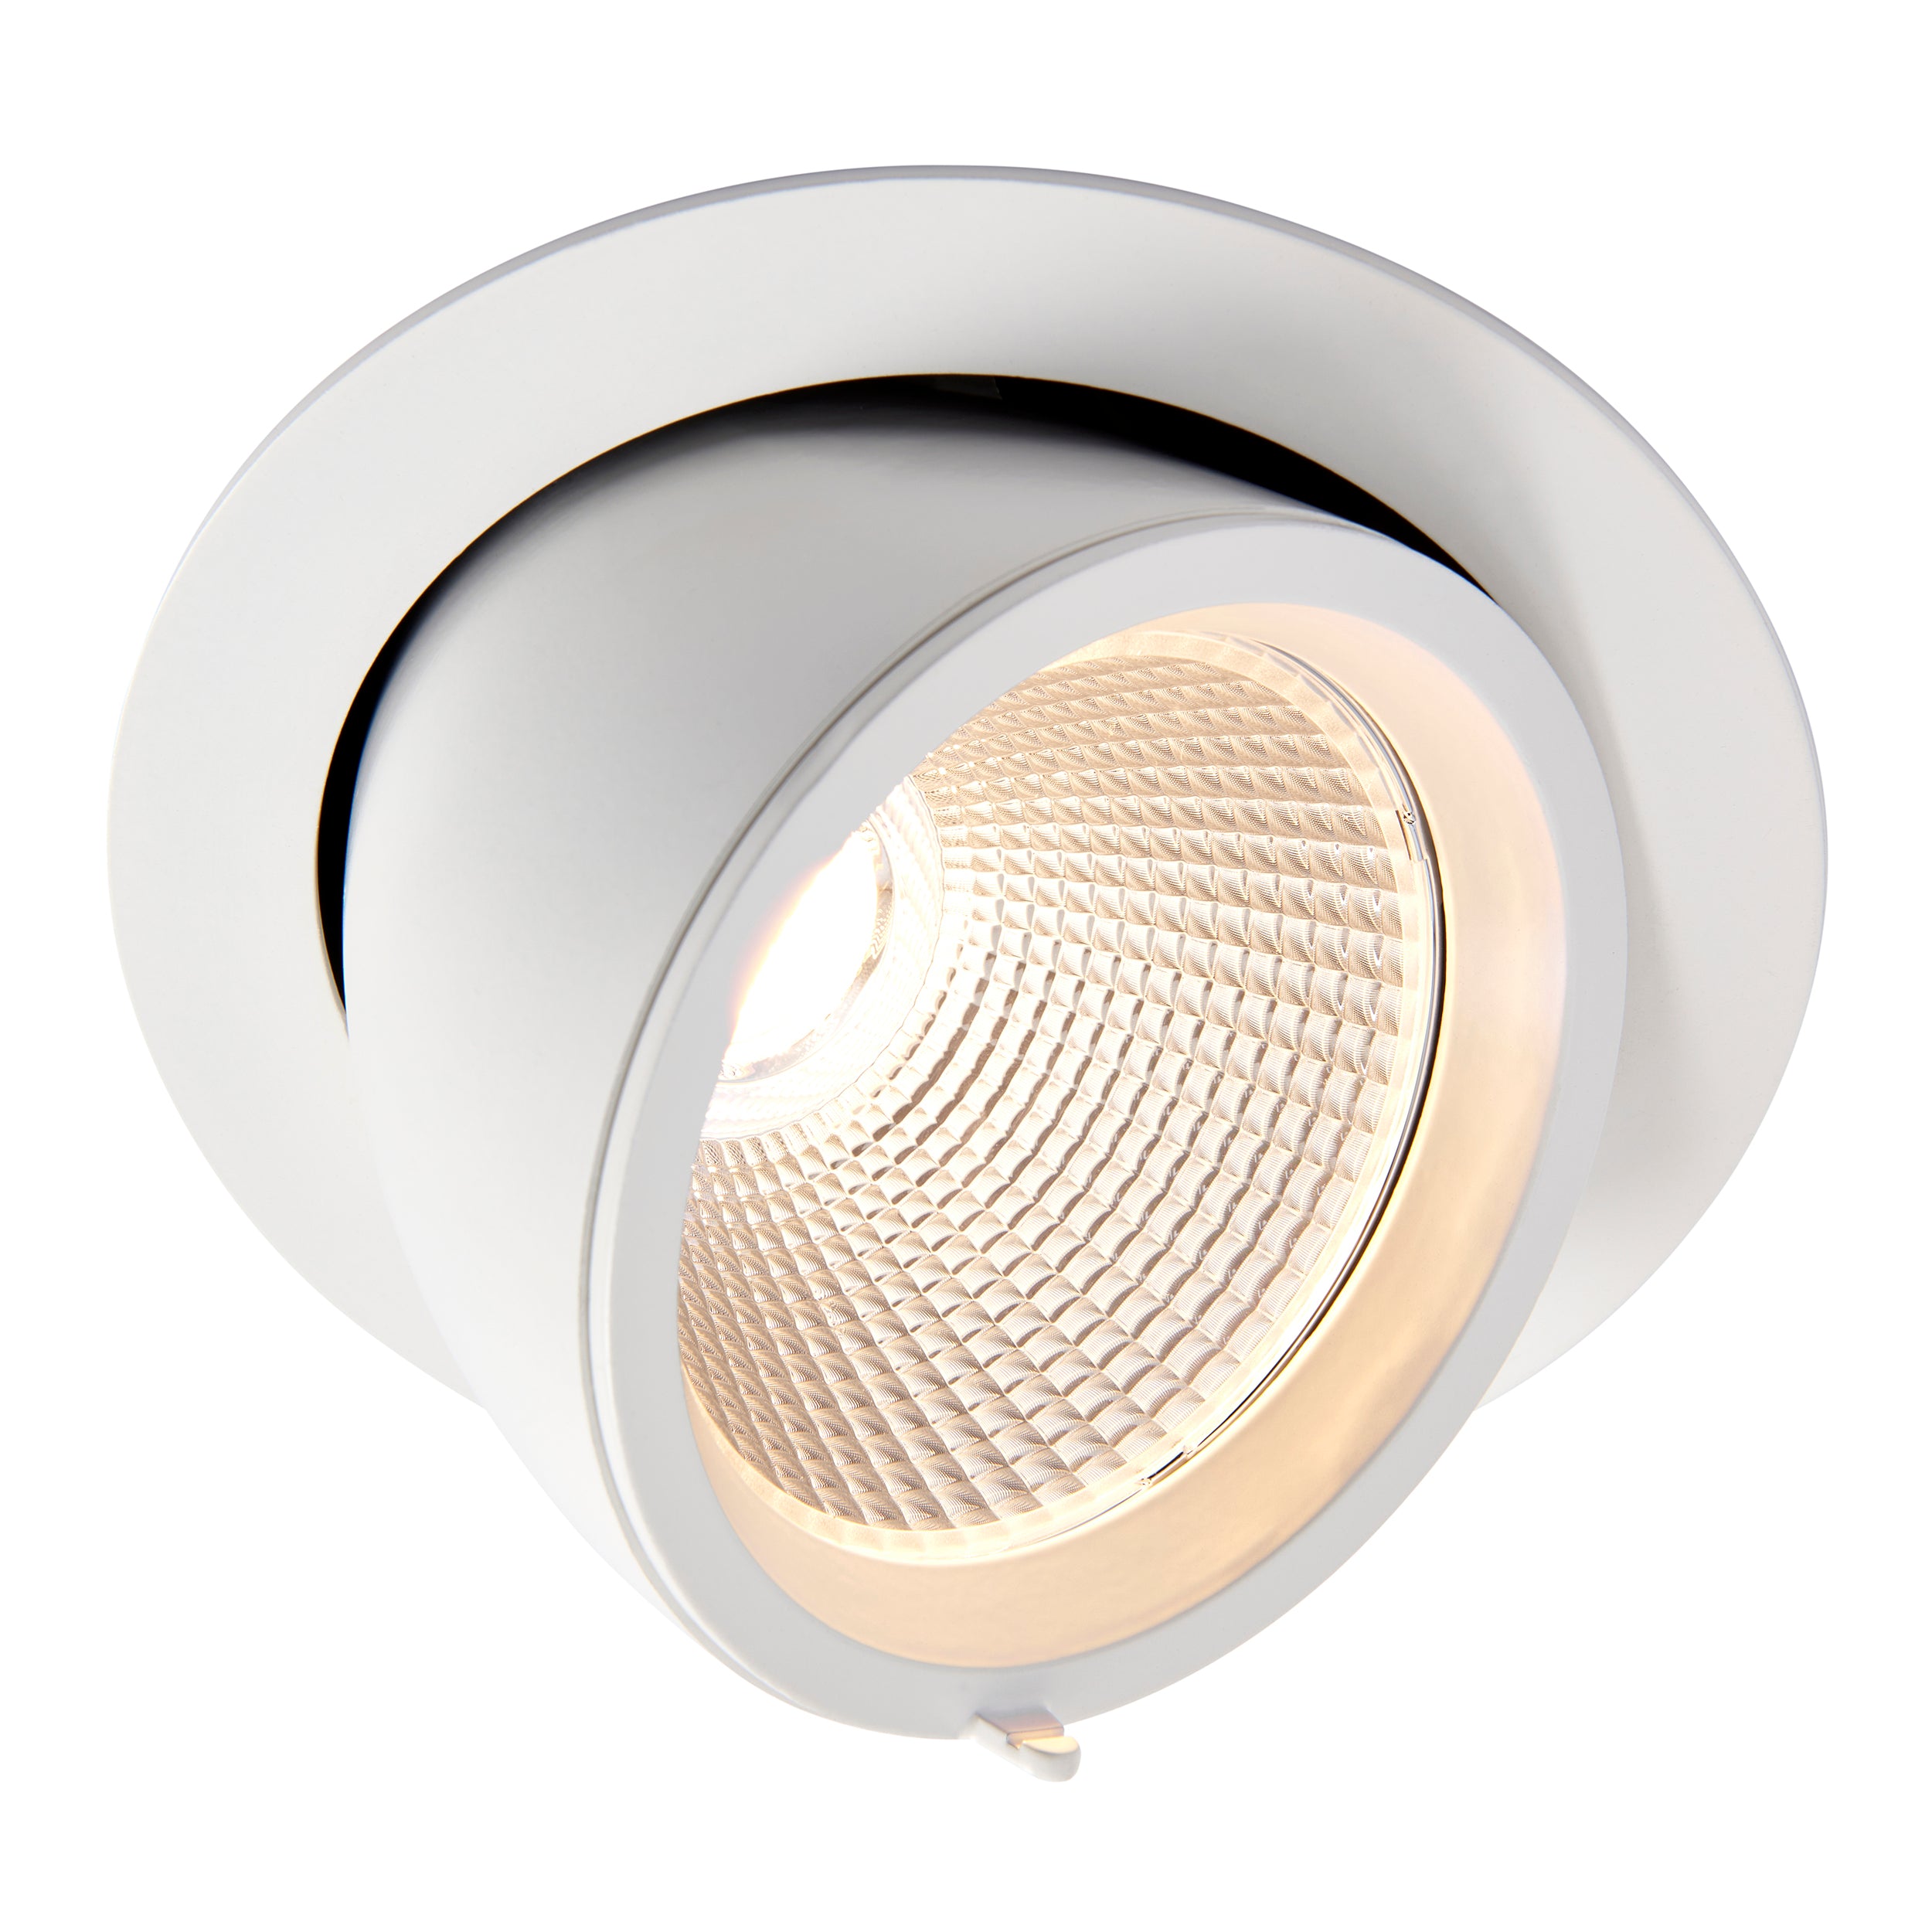 Saxby Lighting Axial round 36W 99555